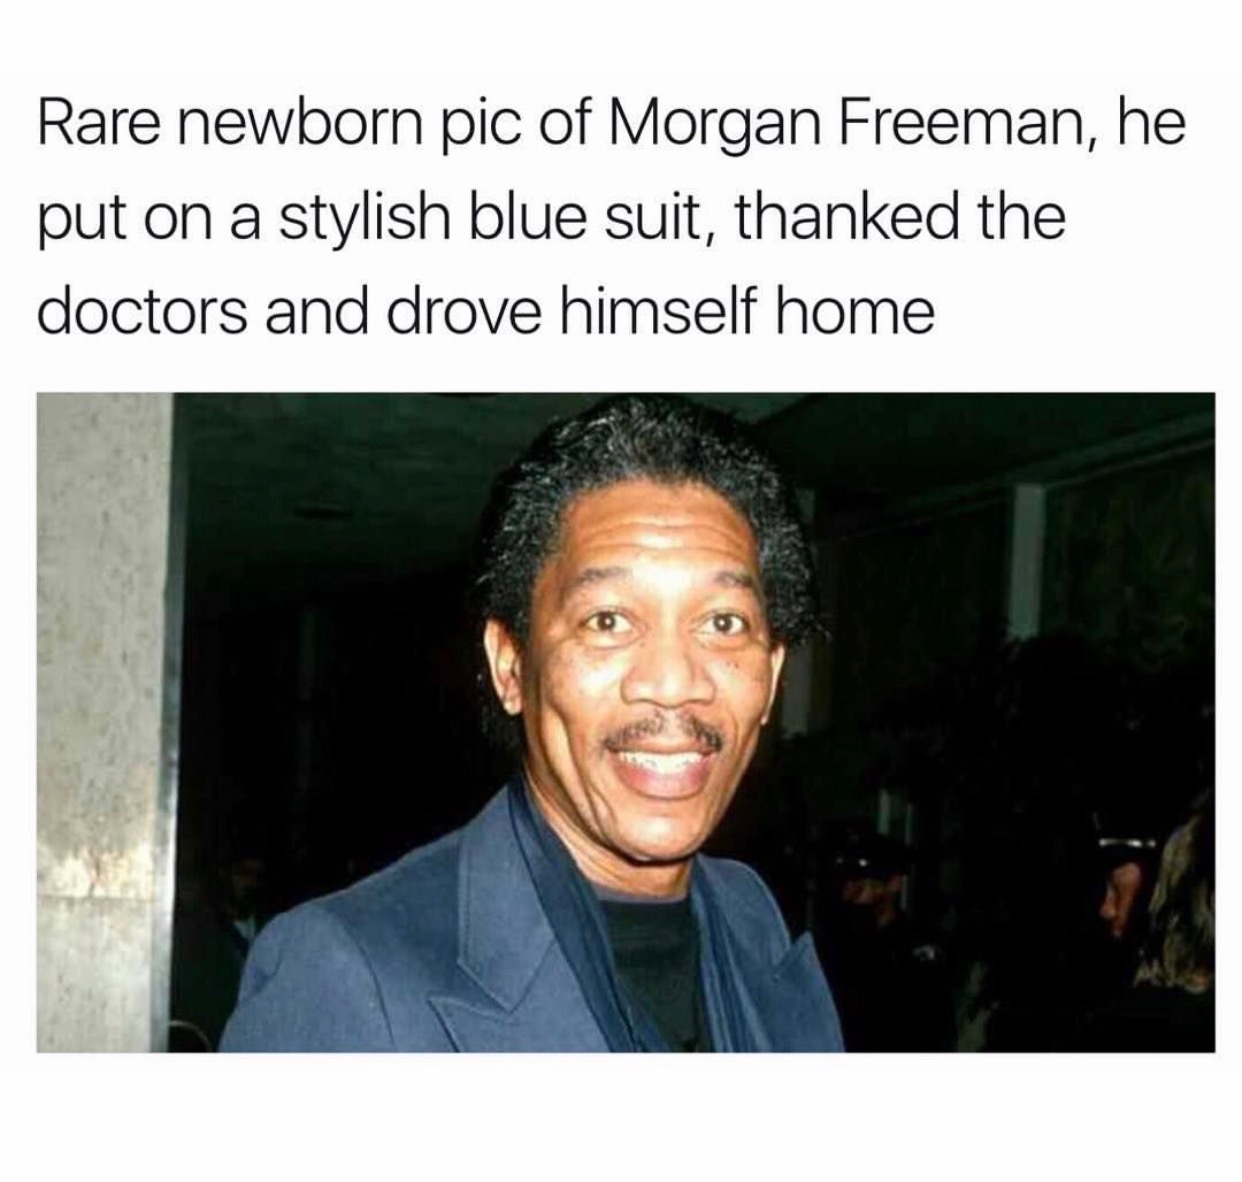 memes - baby morgan freeman - Rare newborn pic of Morgan Freeman, he put on a stylish blue suit, thanked the doctors and drove himself home